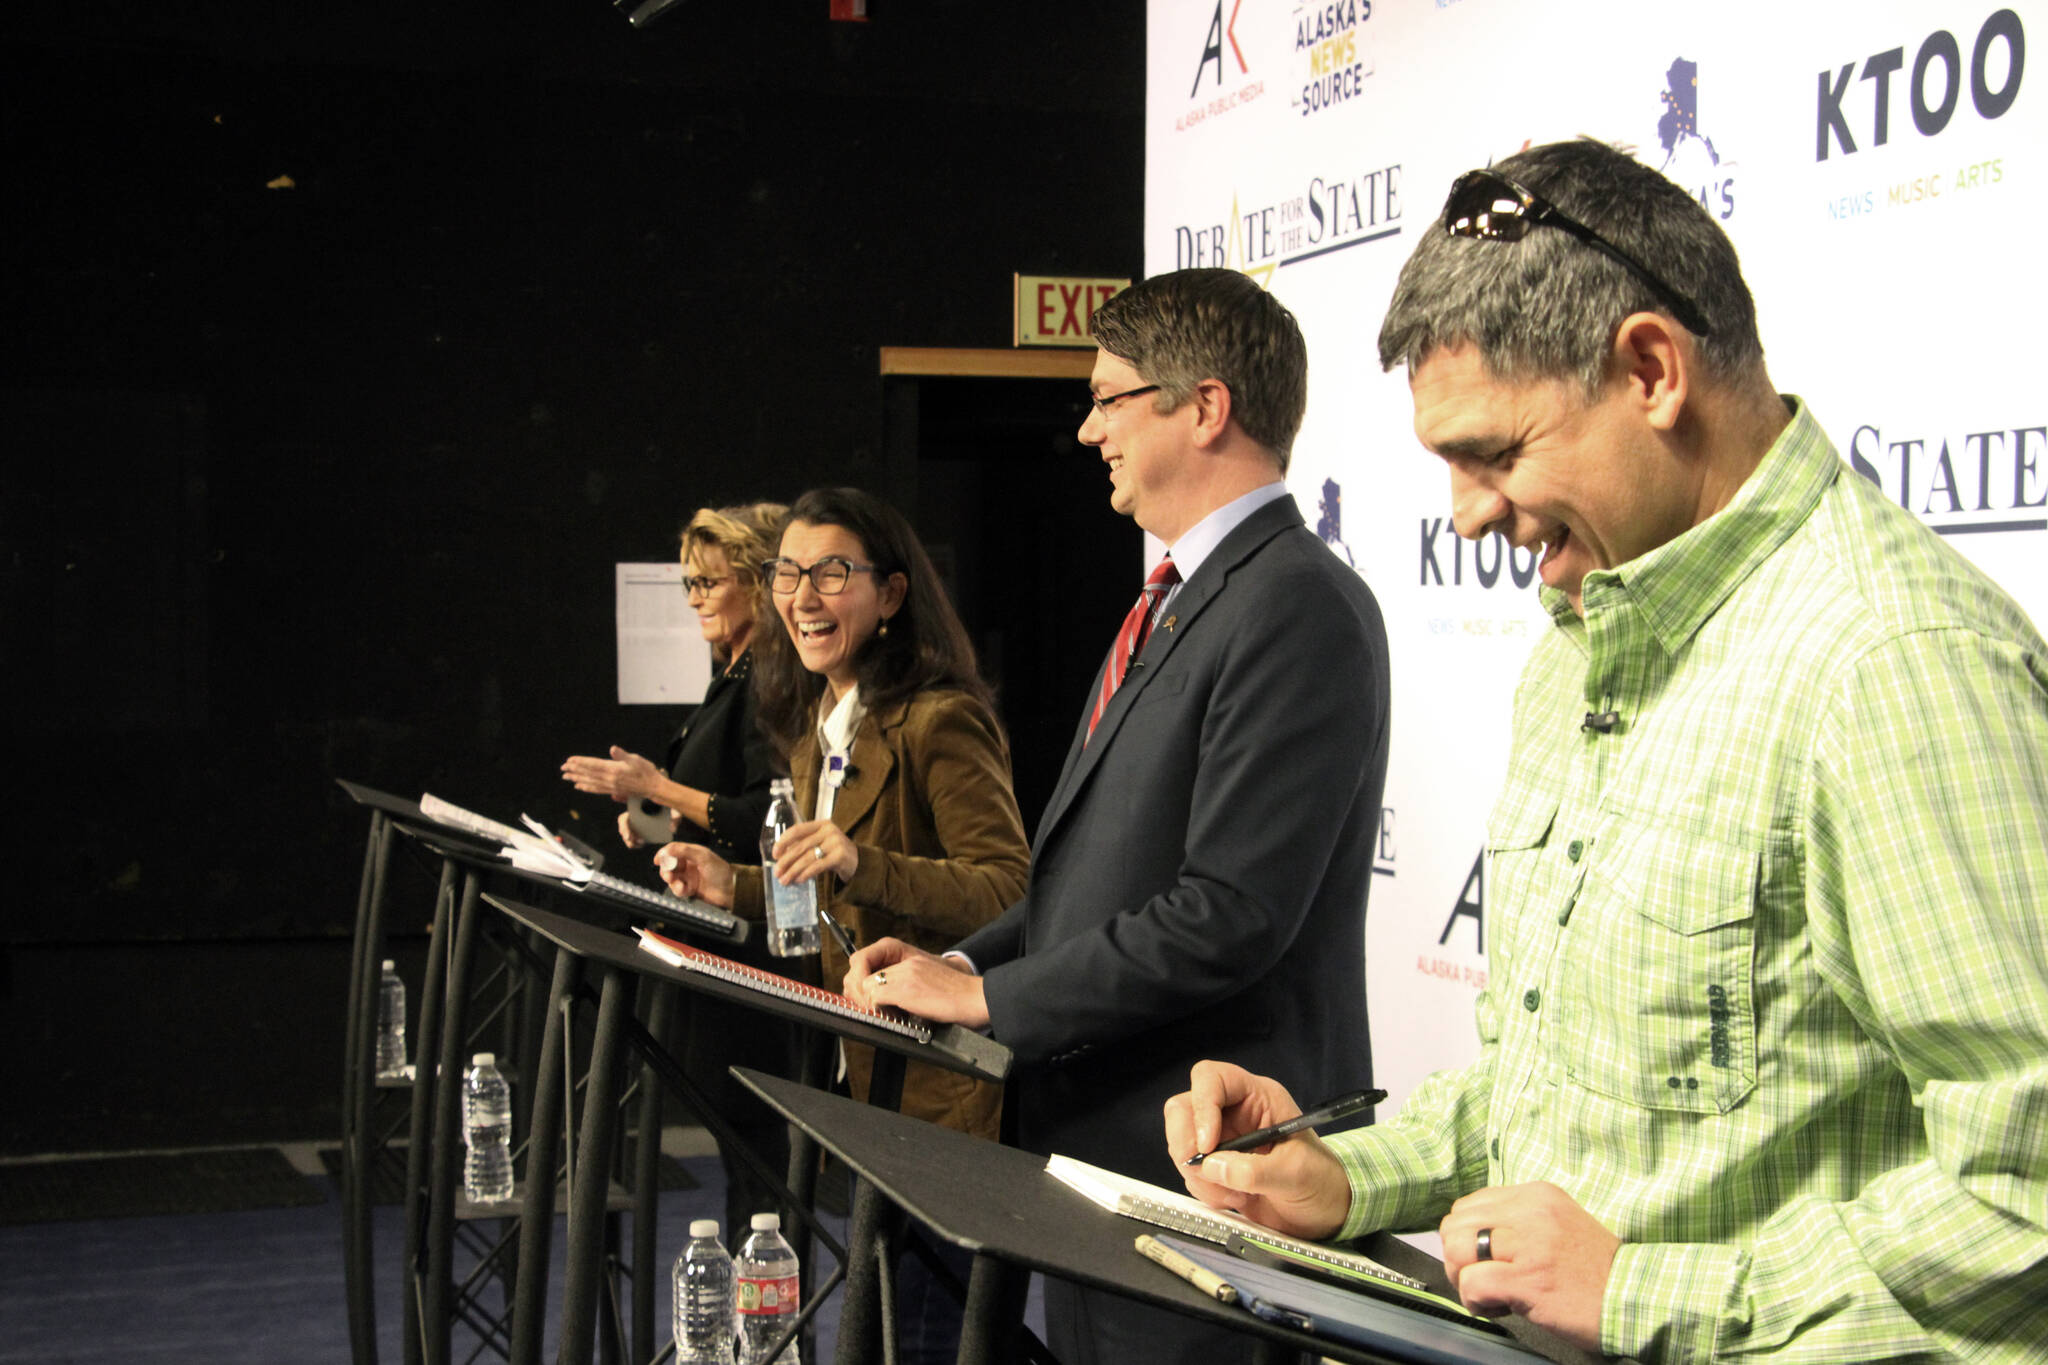 Candidates for Alaska’s sole U.S. House seat share a laugh before a debate Wednesday, Oct. 26, 2022, in Anchorage, Alaska. From left are Republican Sarah Palin, U.S. Rep. Mary Peltola, a Democrat; Republican Nick Begich, and Chris Bye, a Libertarian. (AP Photo/Mark Thiessen)